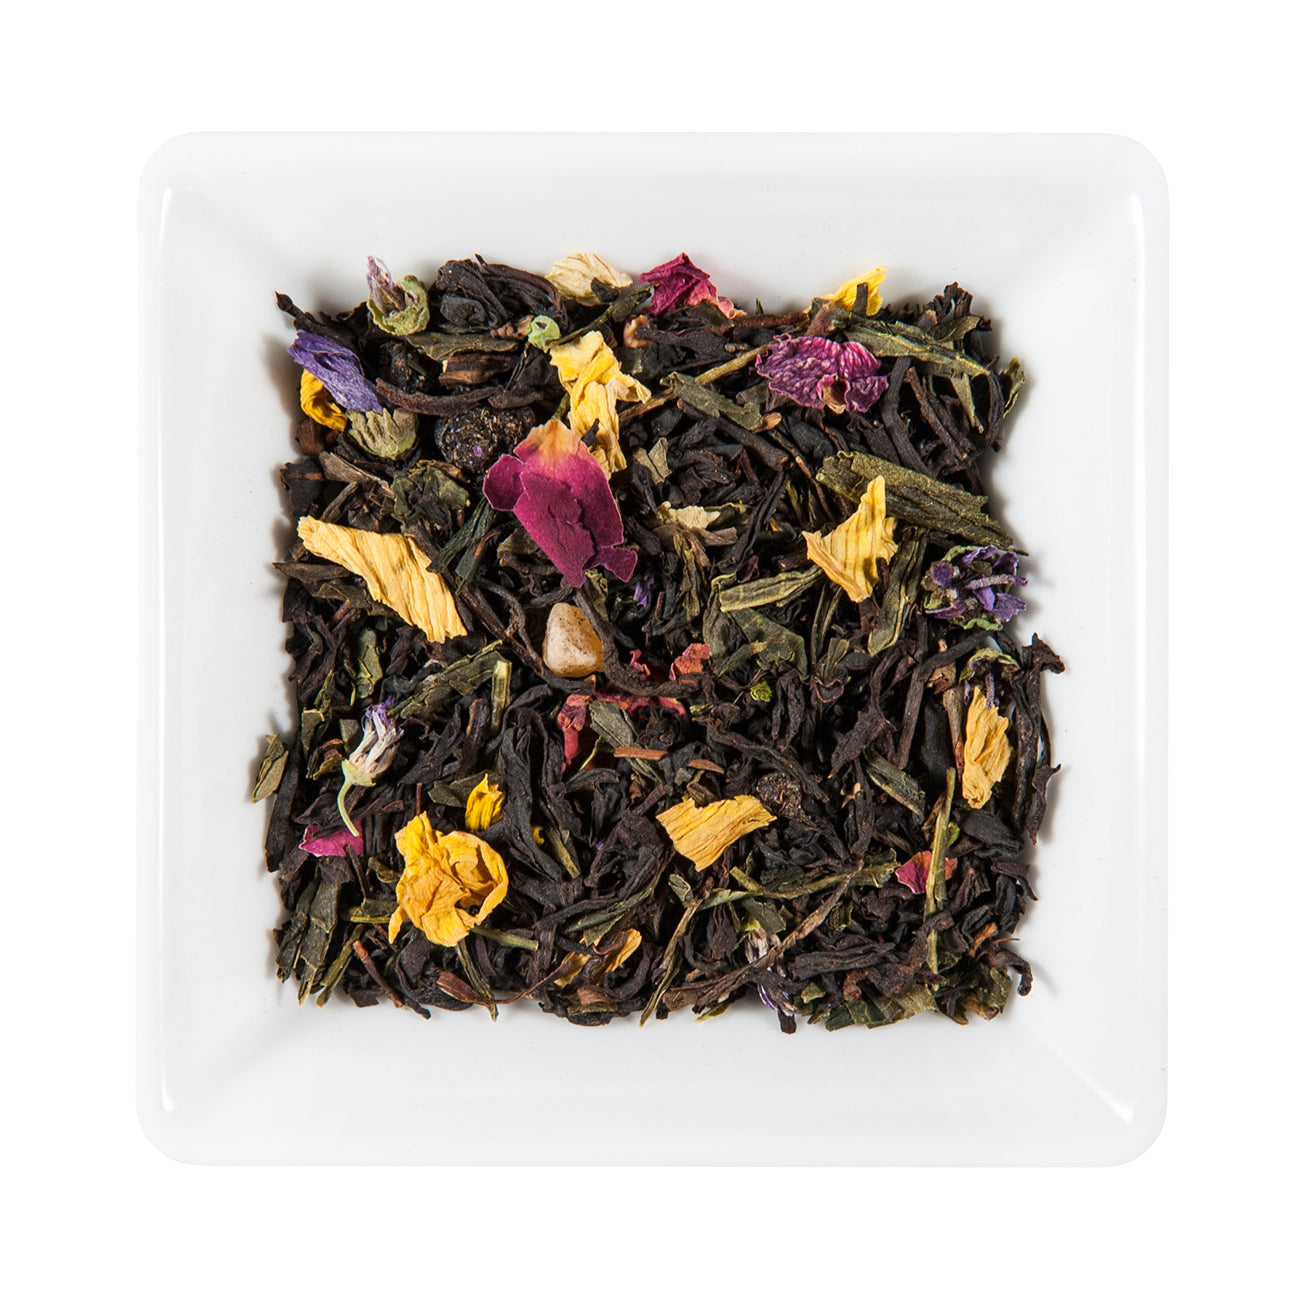 101 Nights, Flavored Green and Black Tea Blend with Natural Flower and Fruit Flavorings, Miami.Coffee